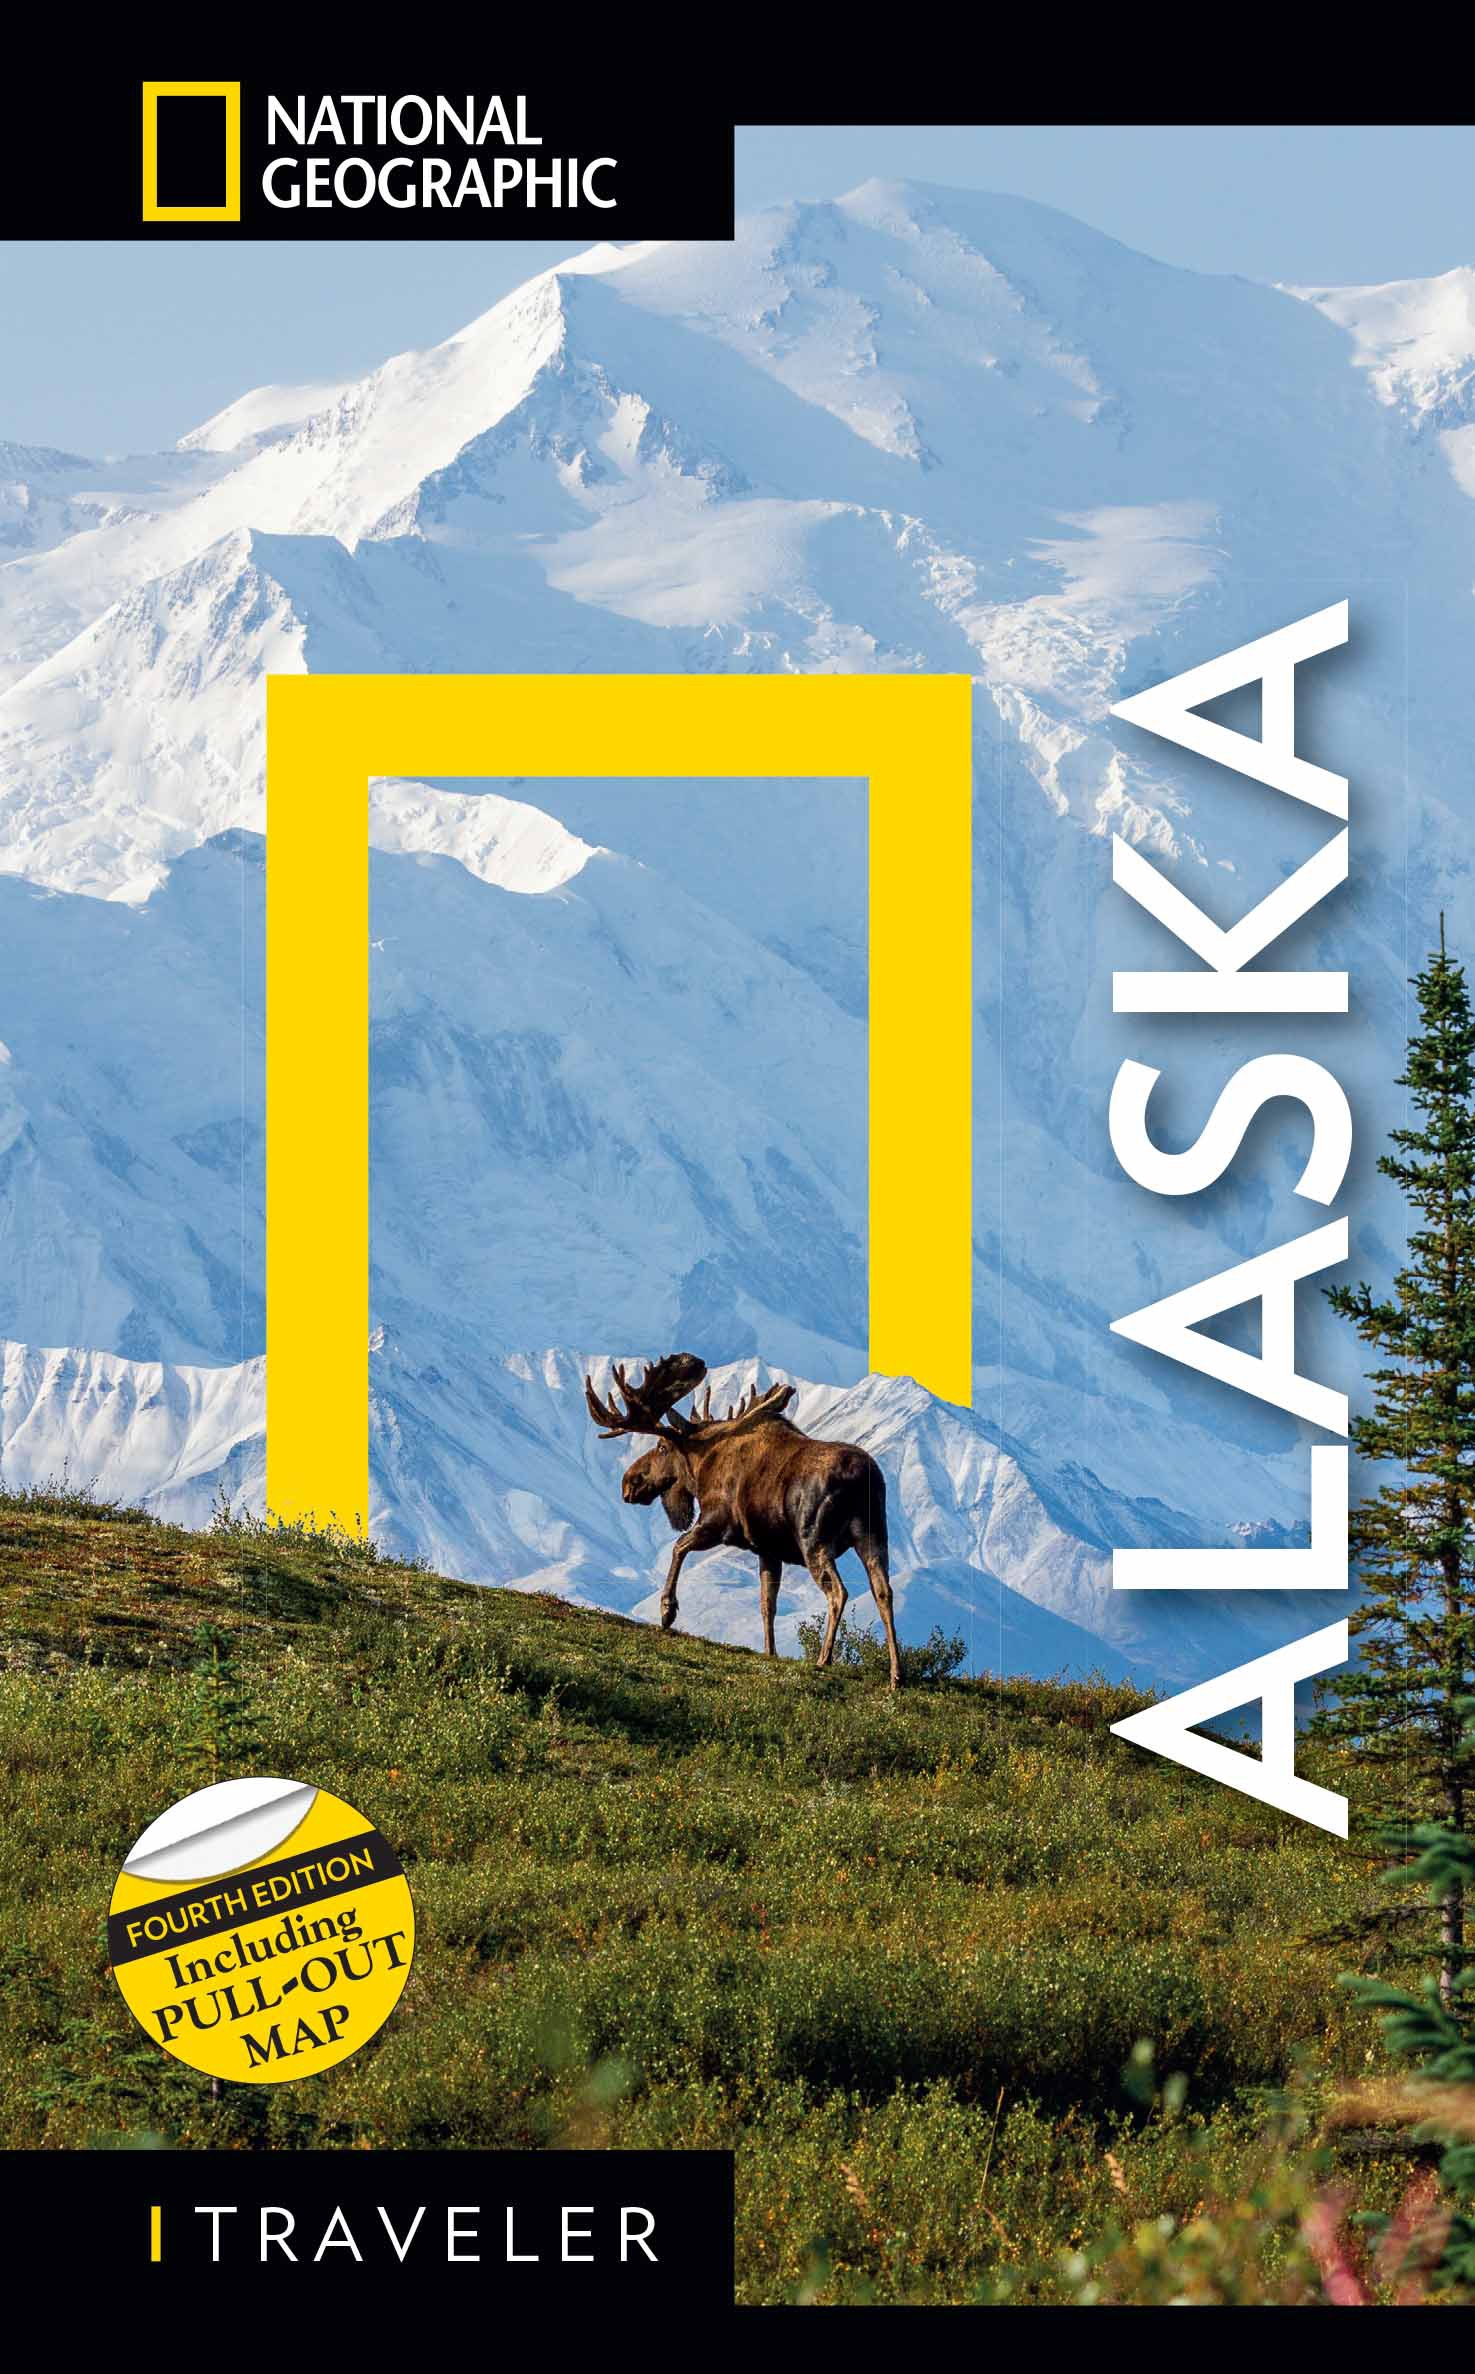 National Geographic Traveler: Alaska, 4th Edition by NATIONAL